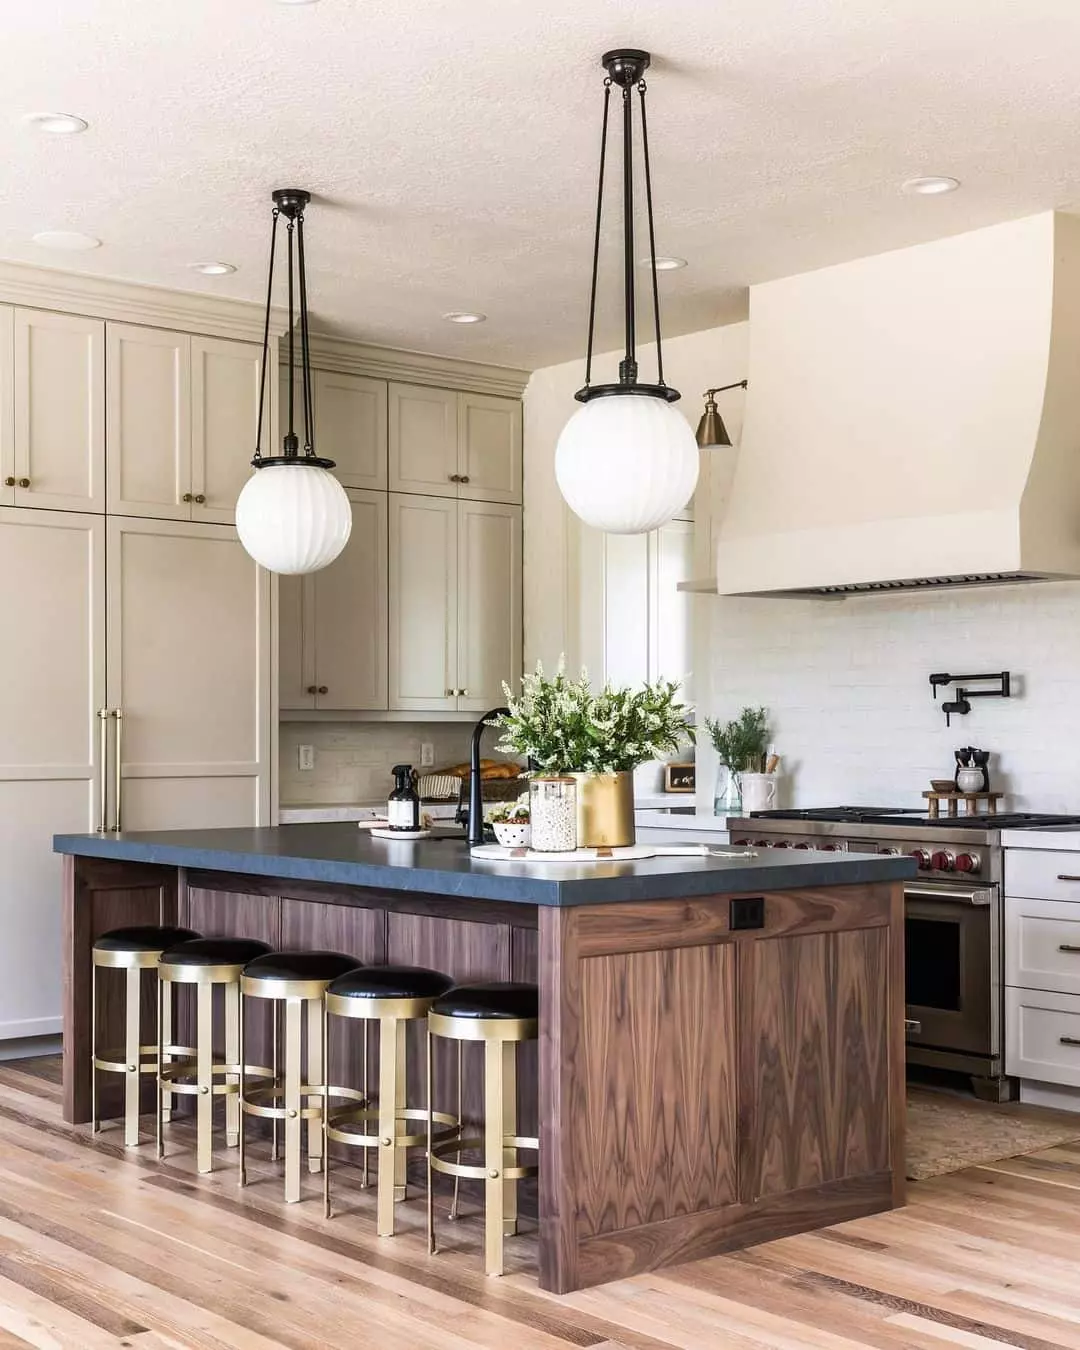 Beautiful Two-Toned Kitchens; here are 30 two-colored kitchen designs to spark renovation inspiration!